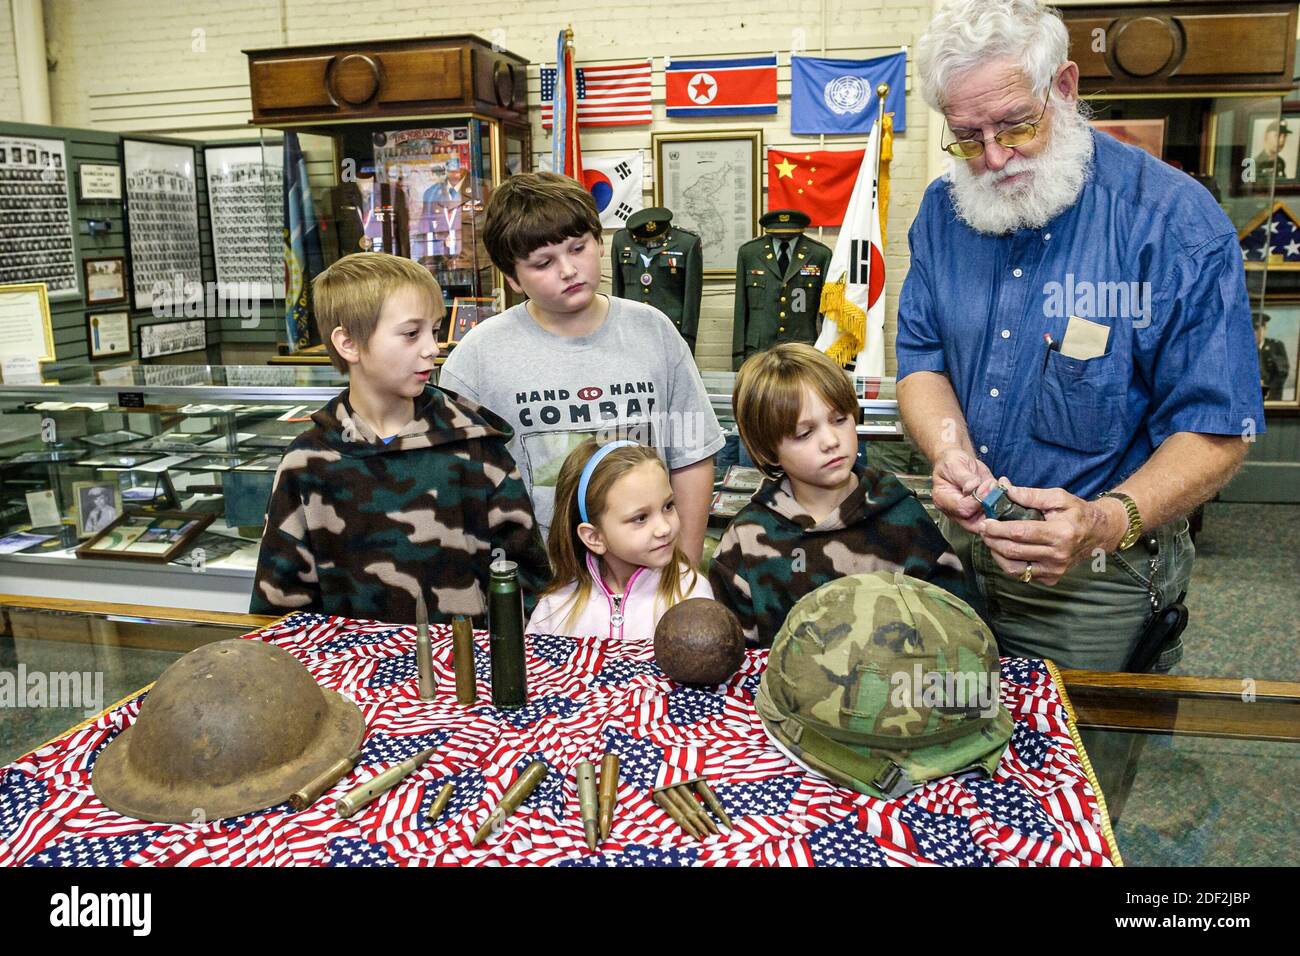 Alabama Athens Alabama Veteran's Museum & Archives,exhibits collection helmets ammunition shells,boys girl kids children,look looking man guide explai Stock Photo